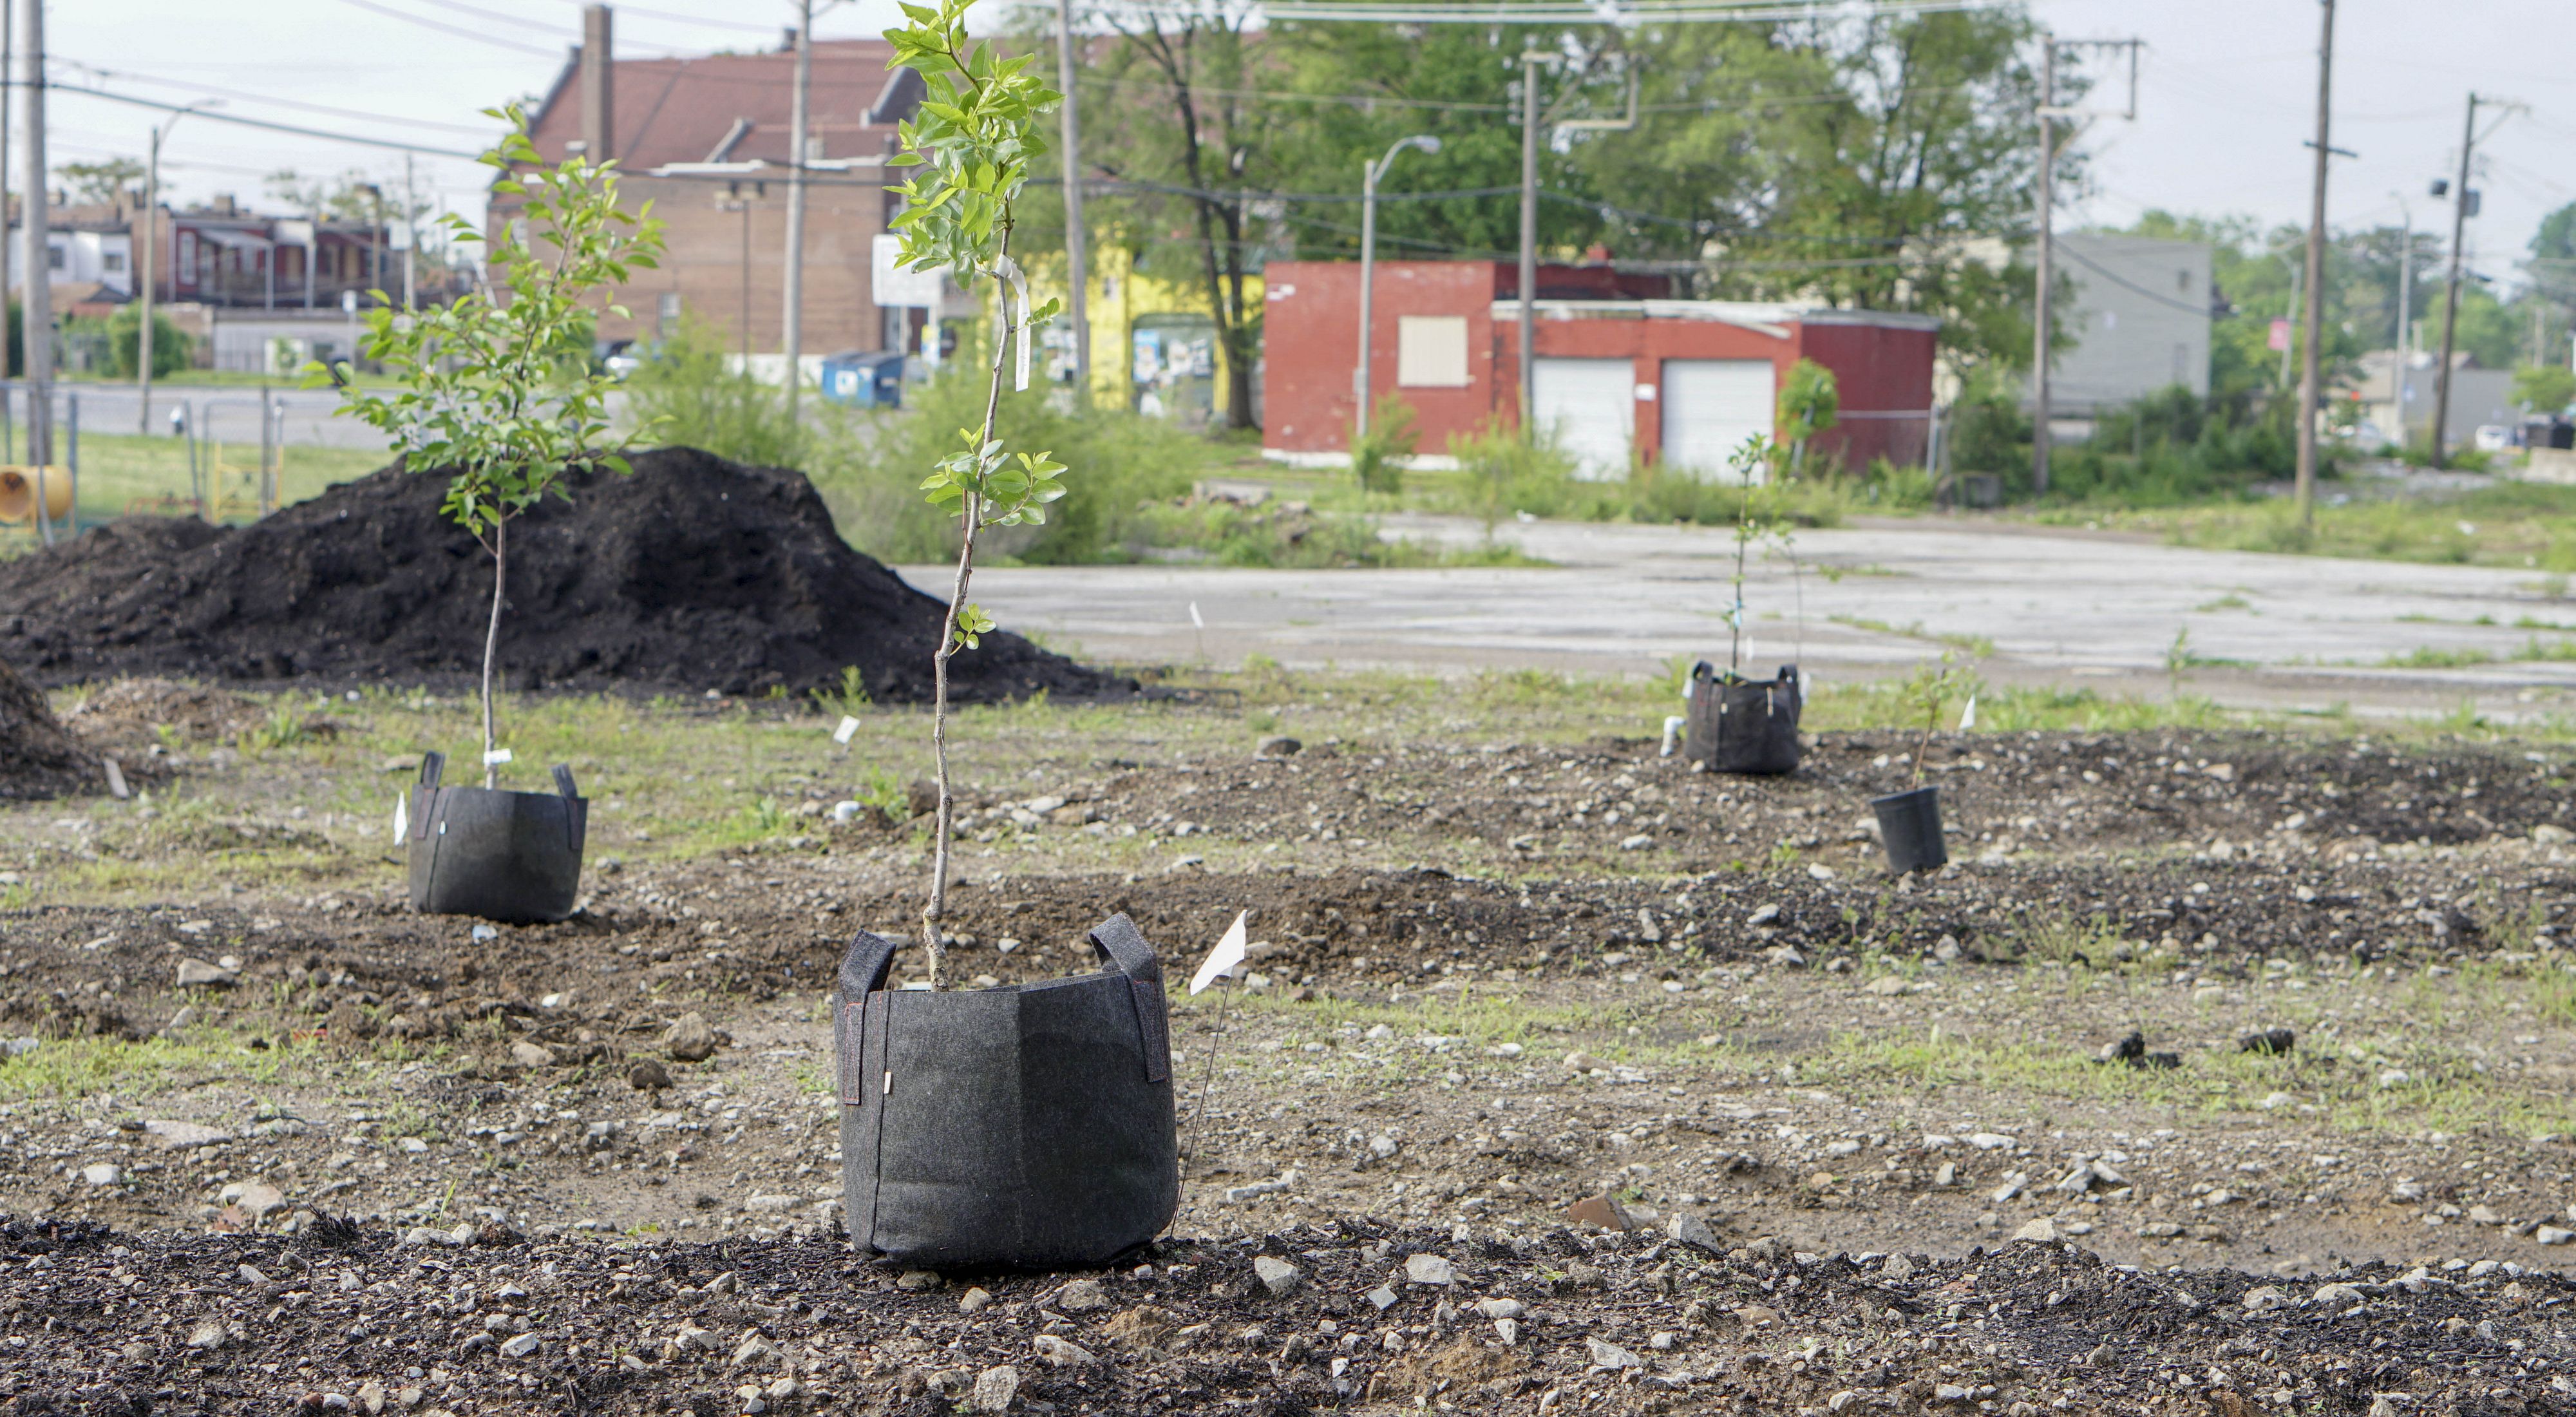 Small trees are ready to be planted in an open city lot.